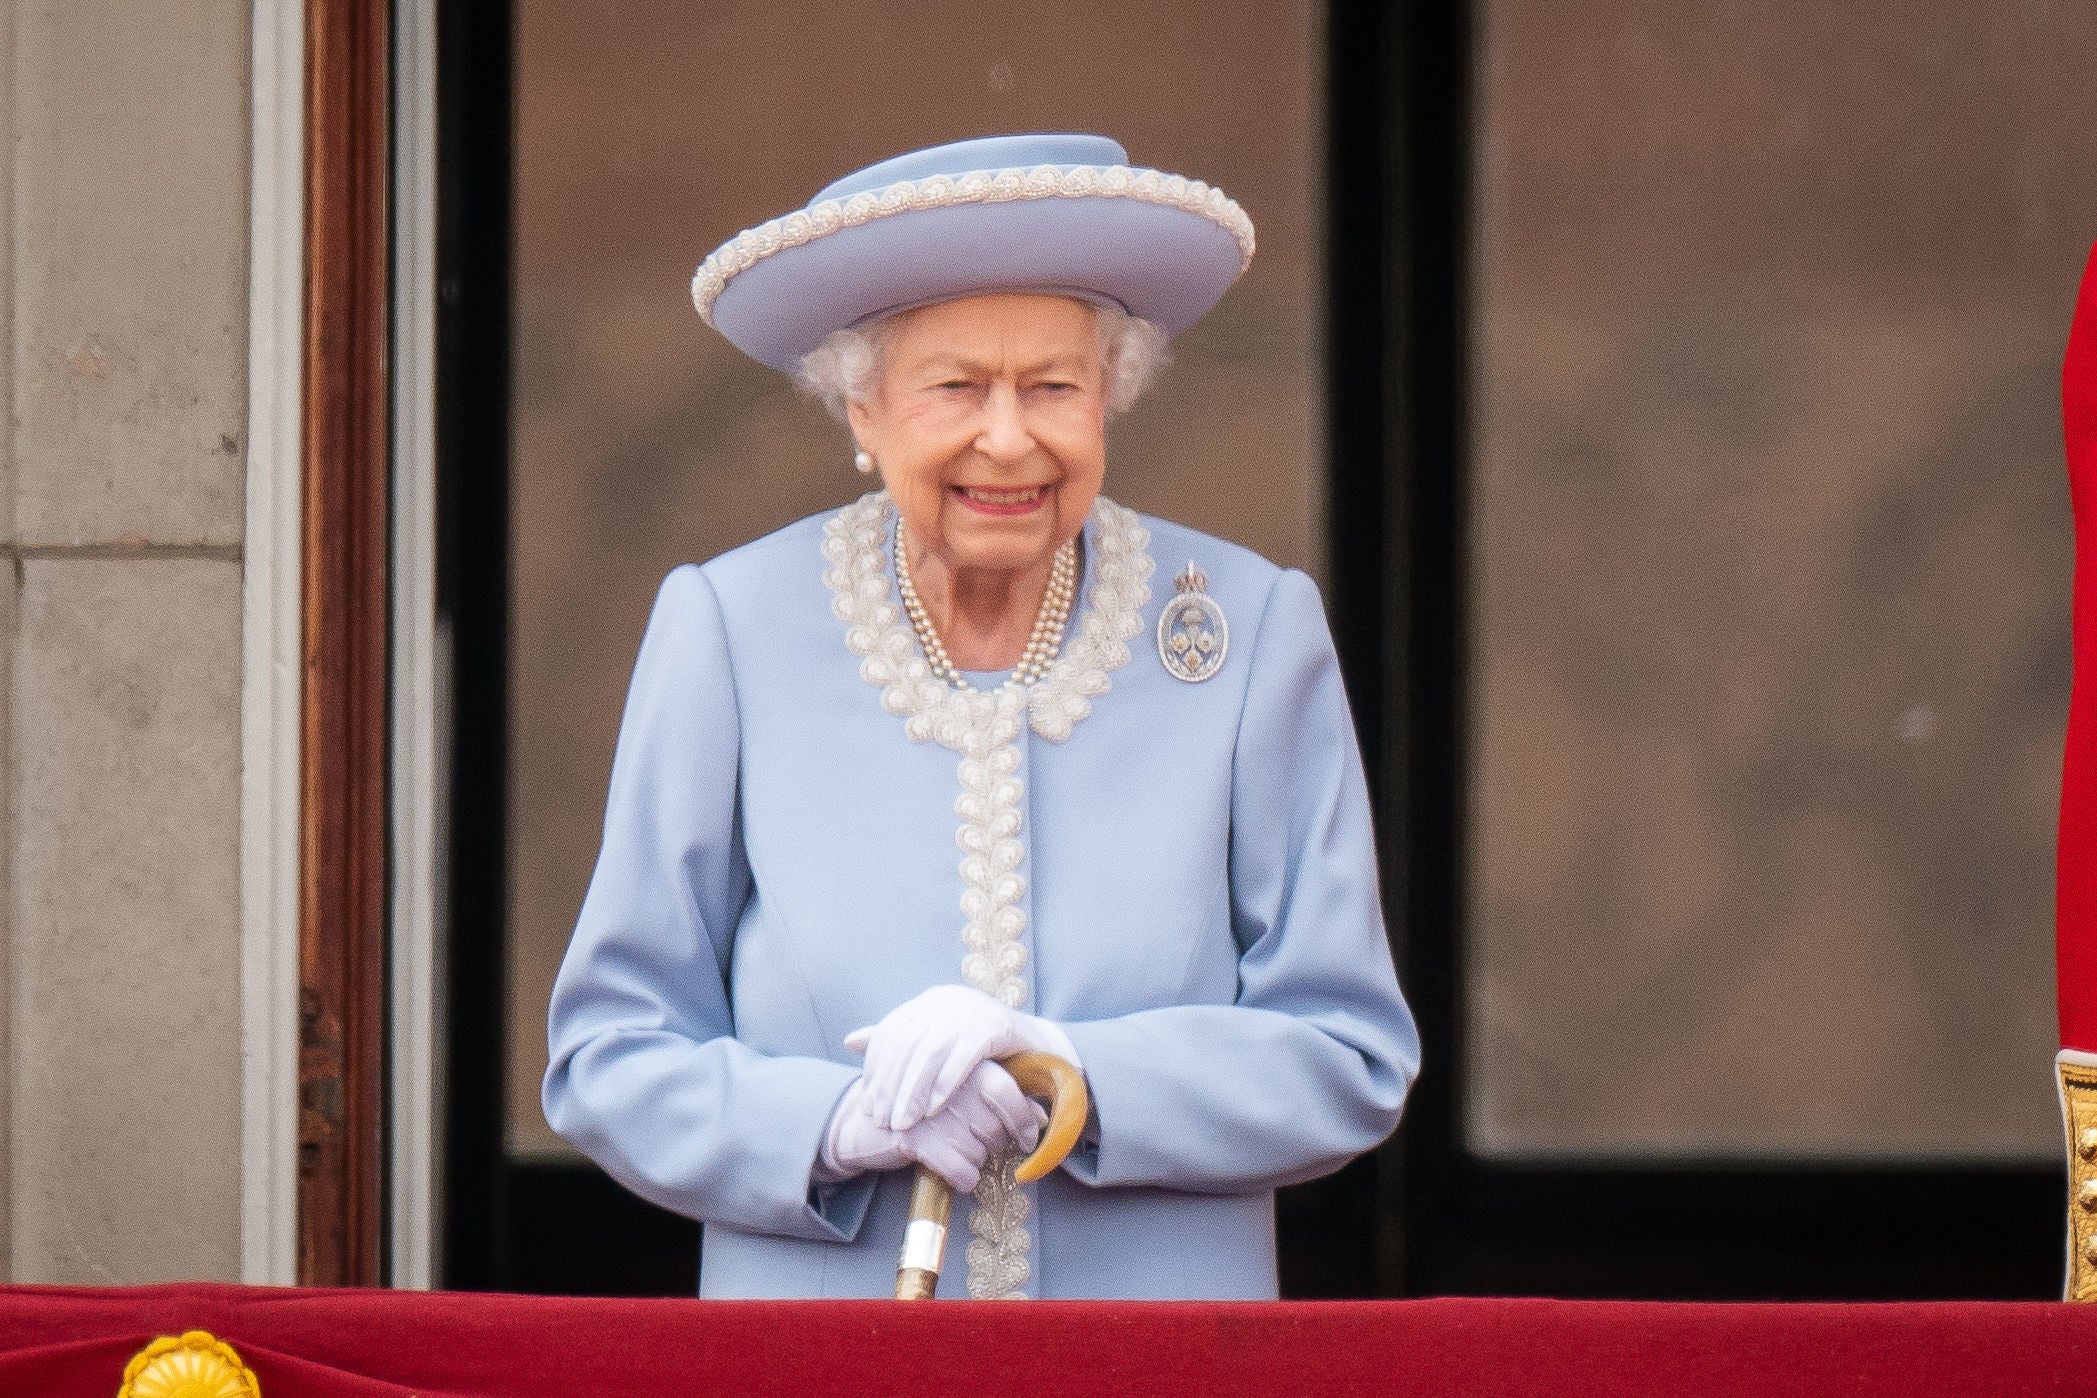 The Queen is said to have a ‘gorgeous smile’ by Elisabeth Jennings, who photographed the monarch in 2002 (Aaron Chown/PA)